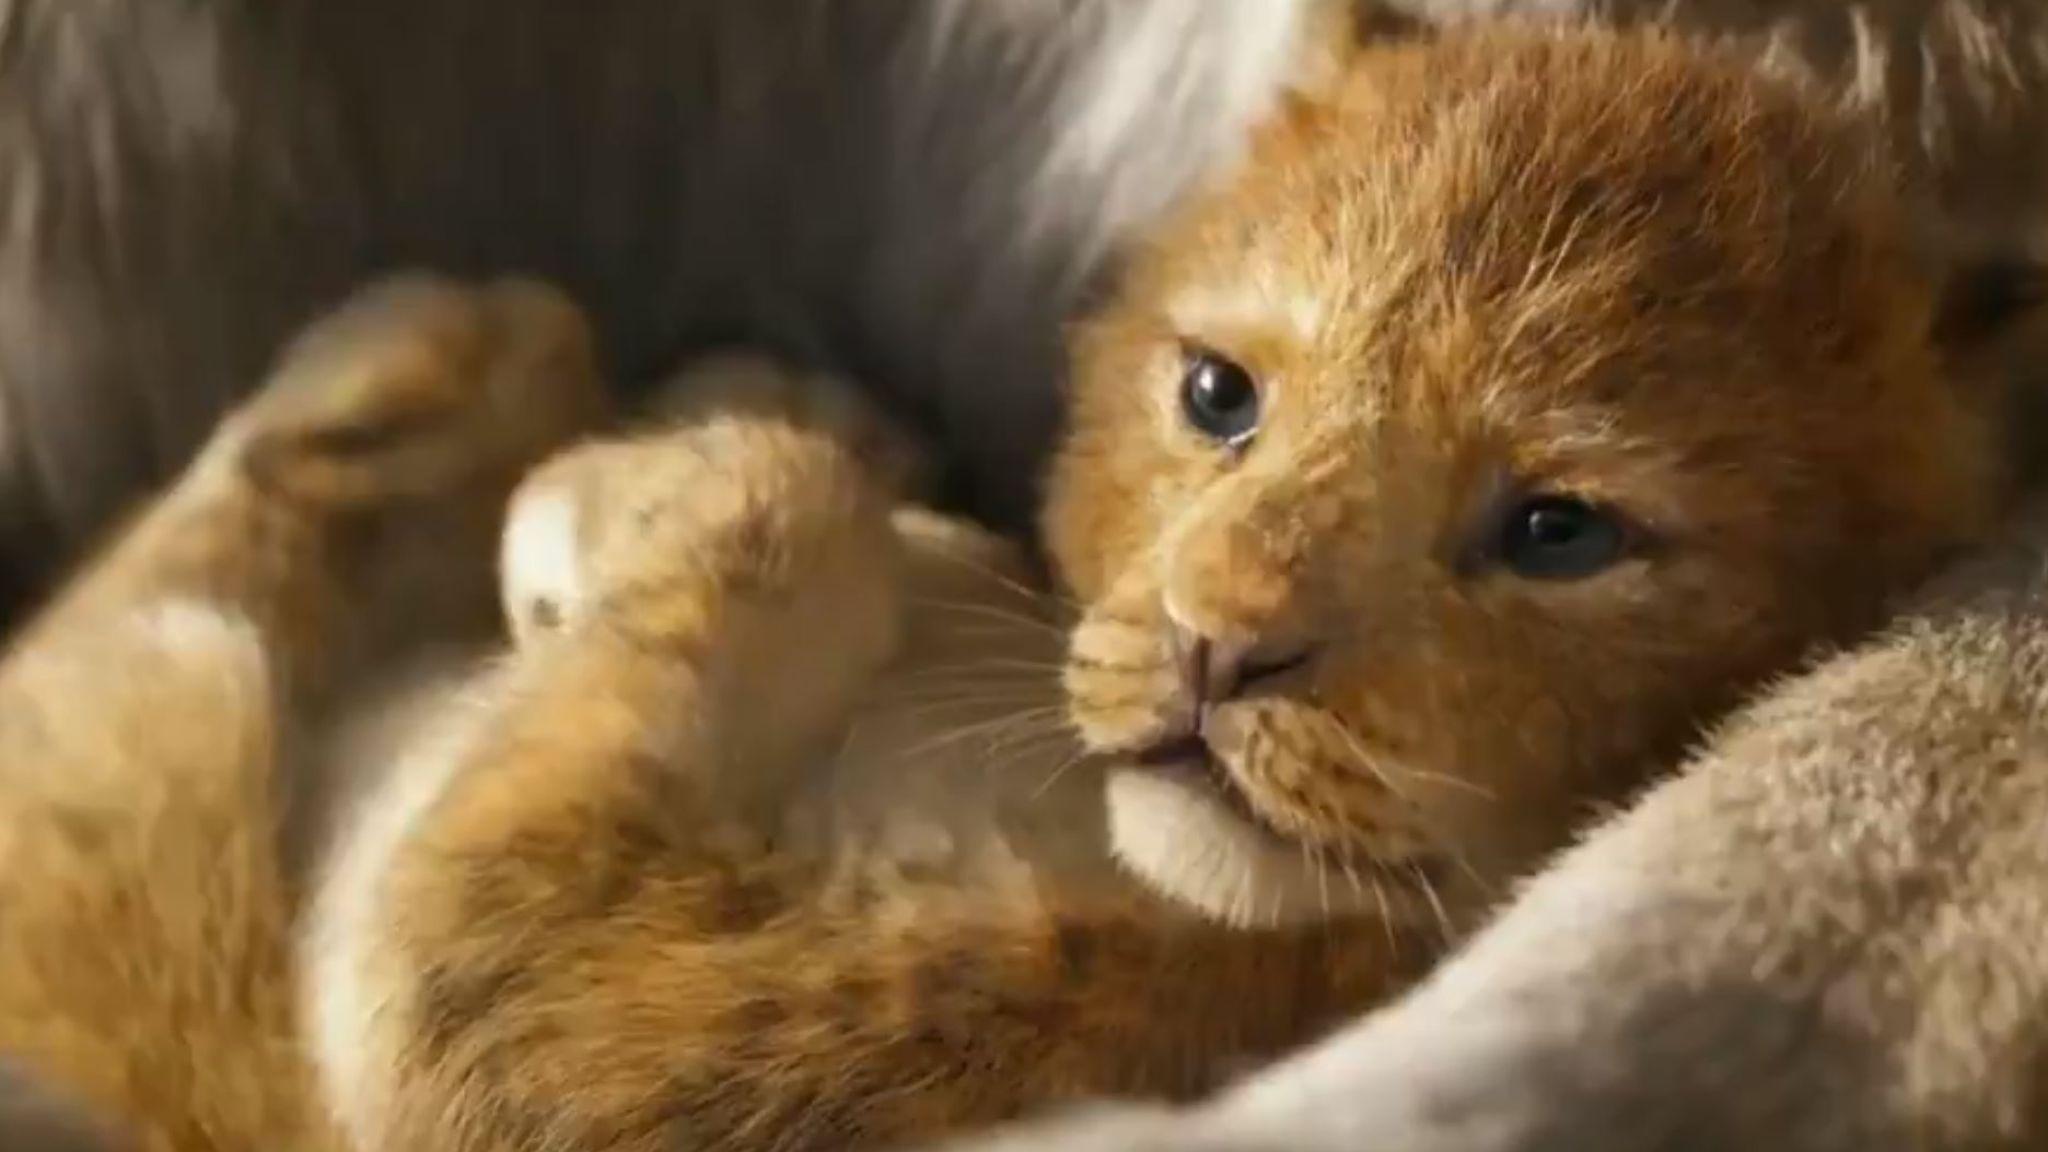 The Lion King: Watch first trailer for remake starring Beyonce